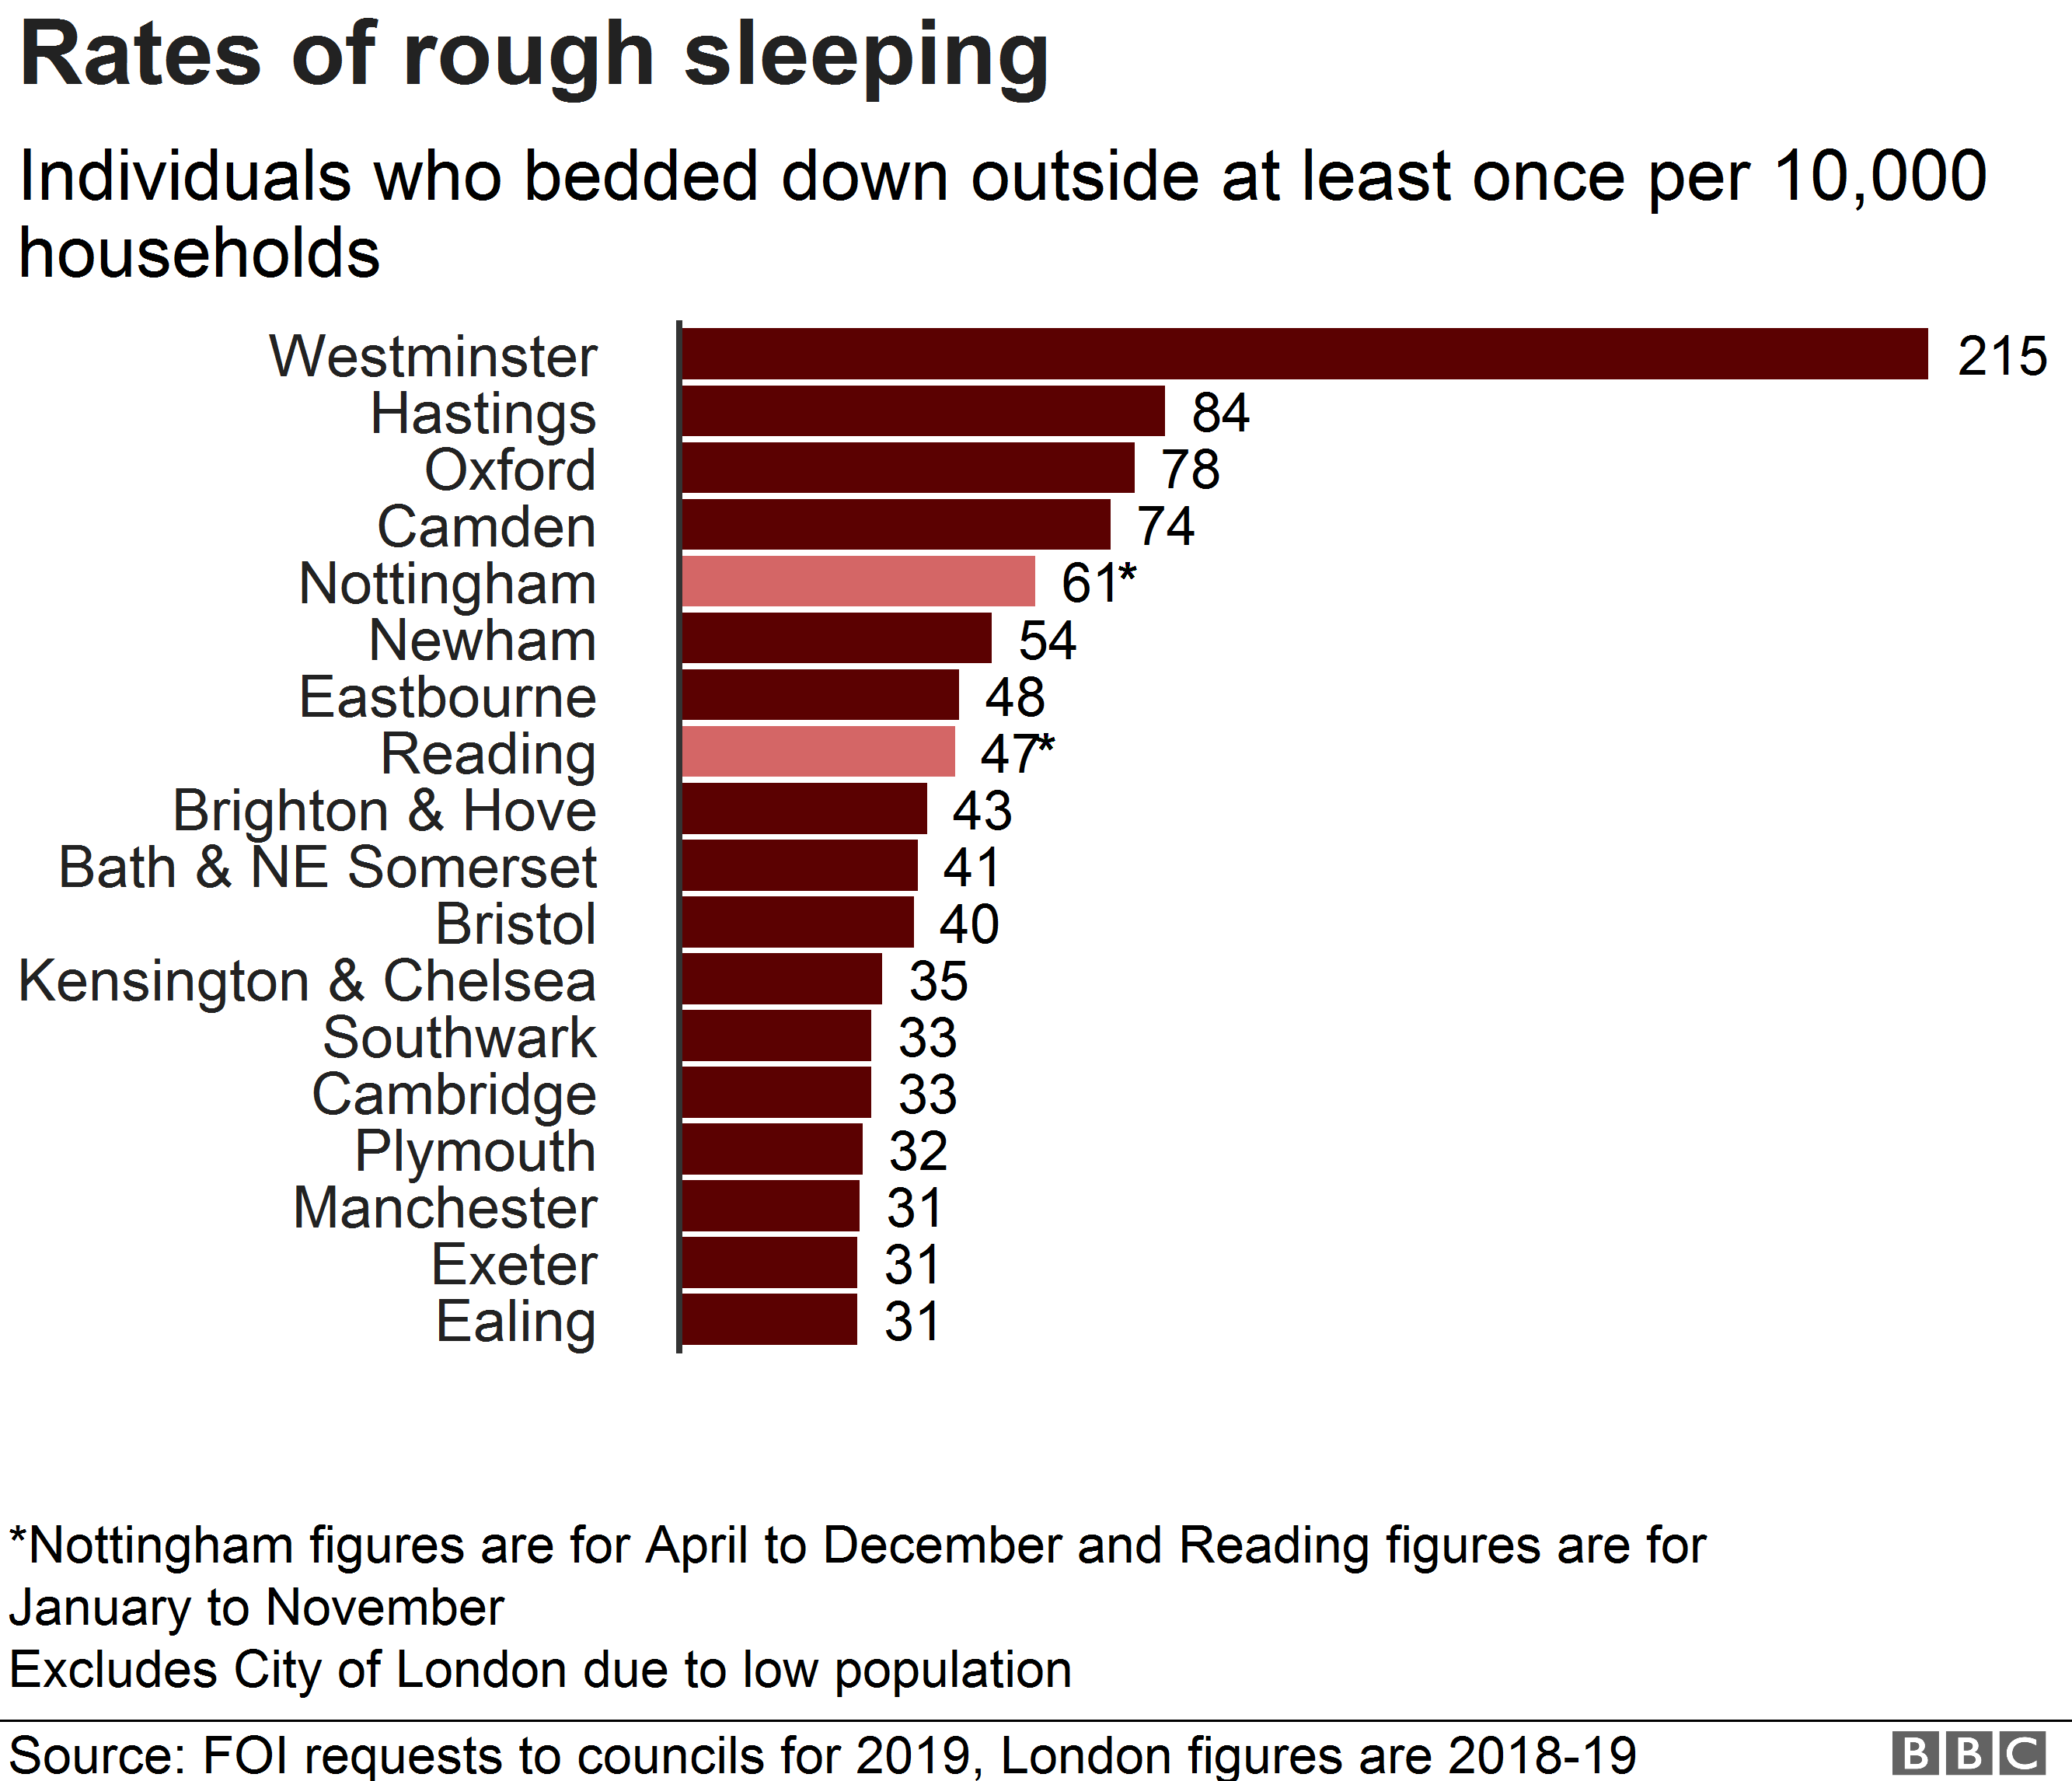 Chart showing rough sleeping rates